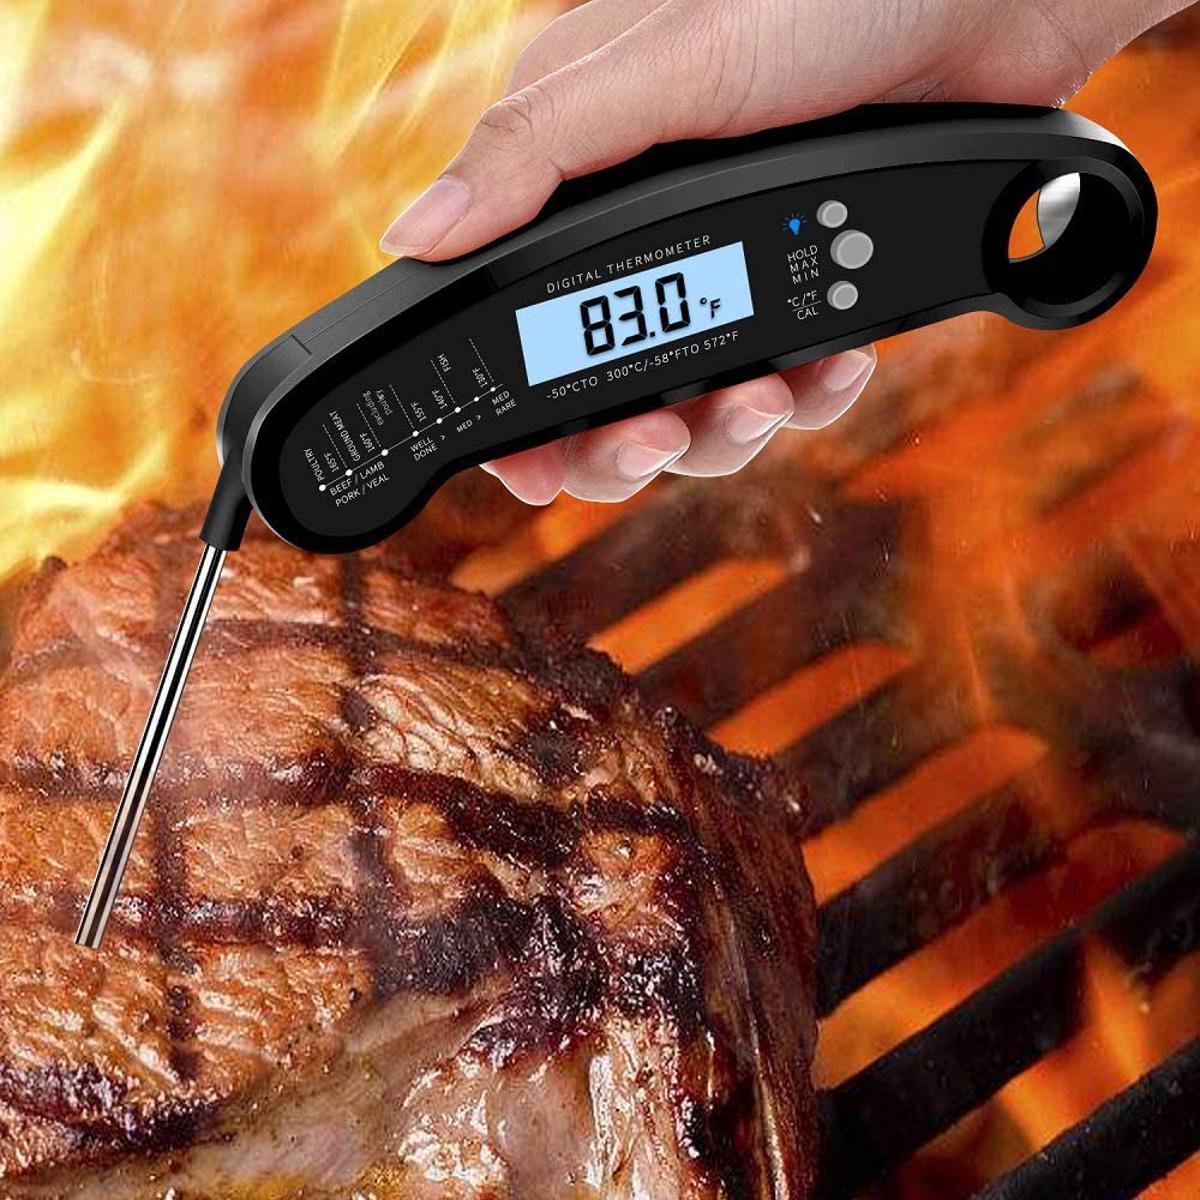 Powlaken Instant Read Meat Thermometer for Kitchen Cooking, Ultra